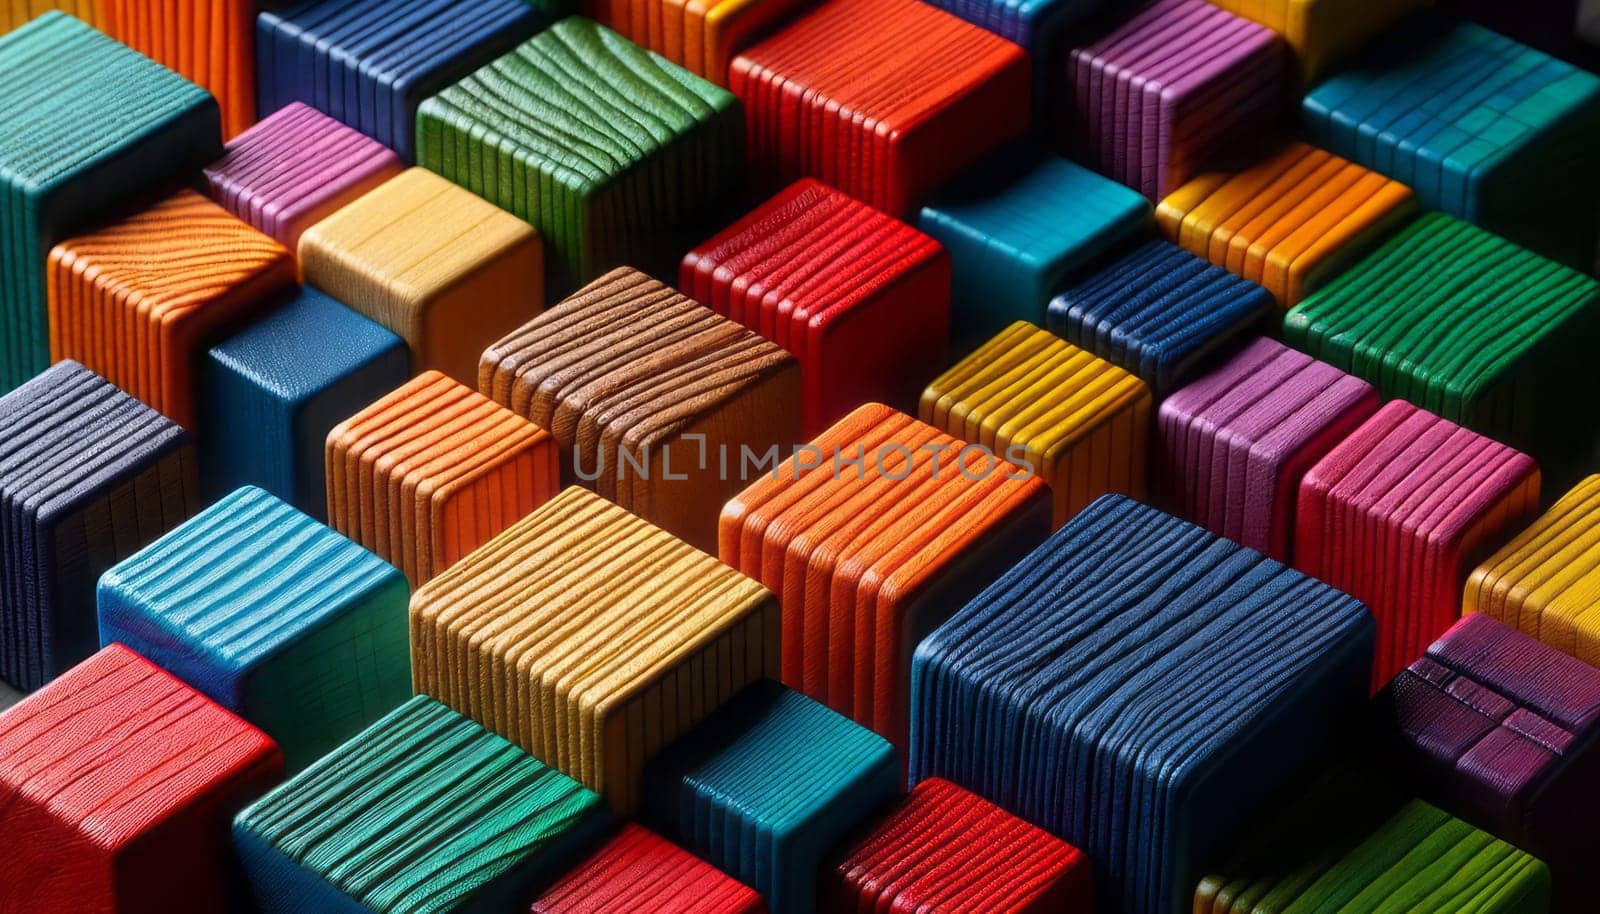 A close-up photography of colorful wooden blocks arranged in a pattern. The blocks feature a vibrant spectrum of colors including red, blue, green, yellow, purple, and more. Each block appears to have a textured, painted surface with visible wood grain, giving them a tactile, handcrafted look. The arrangement shows some blocks standing vertically and others horizontally, creating a three-dimensional effect with shadows adding depth to the composition.